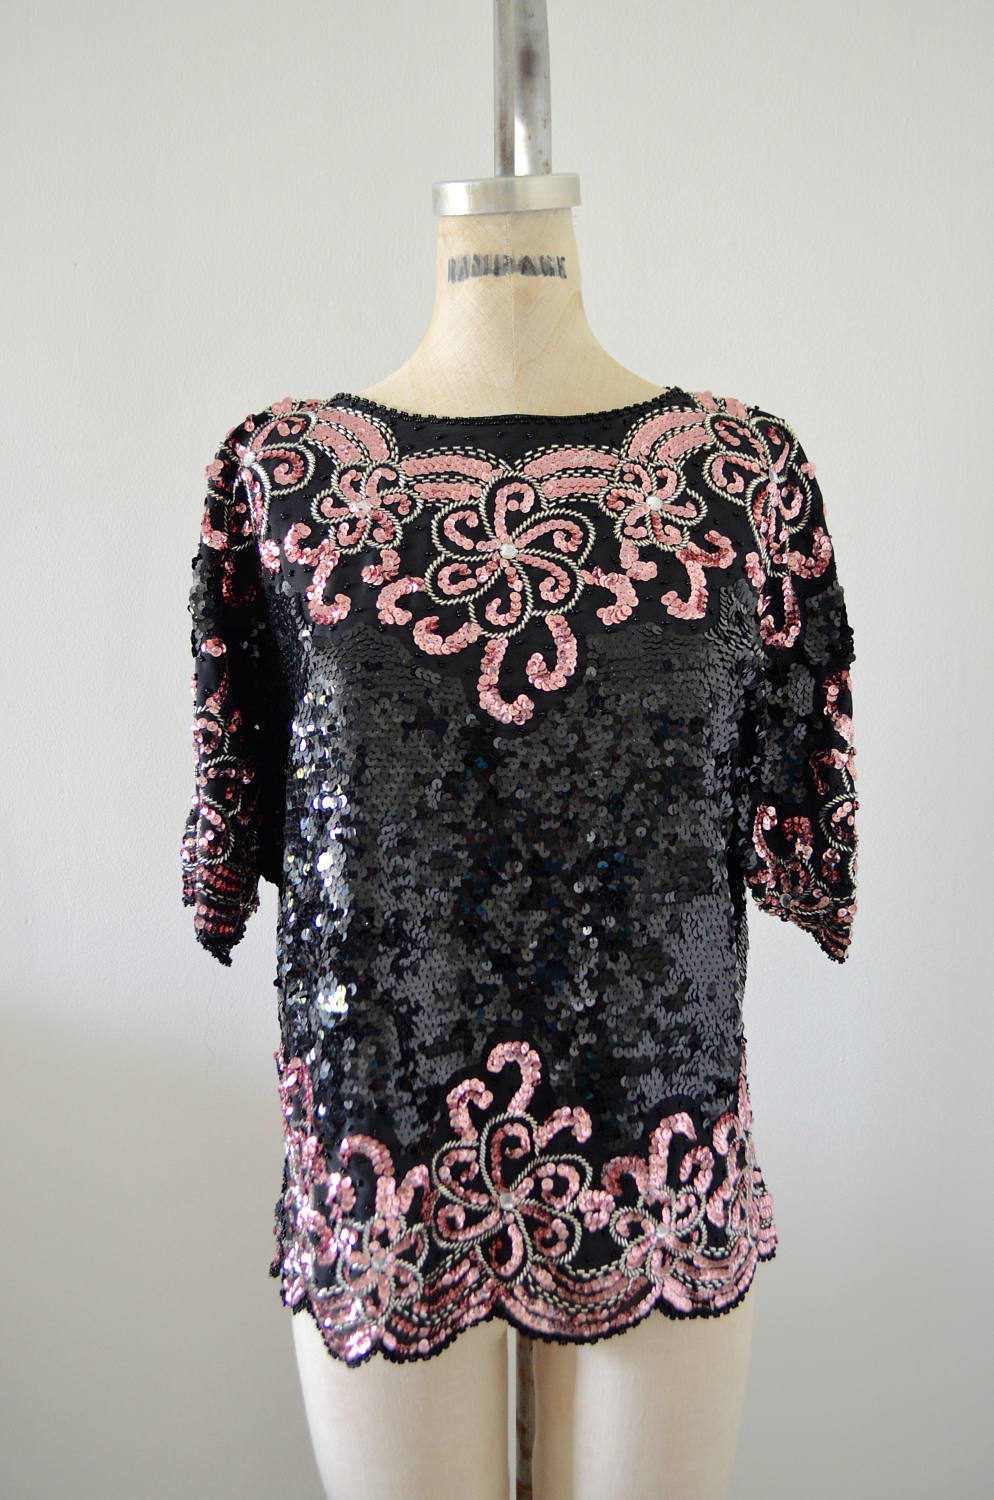 Raglan Black Floral Pink Roses Arabesque Design Sequined Beaded Silk Top Blouse Style Fall 2017